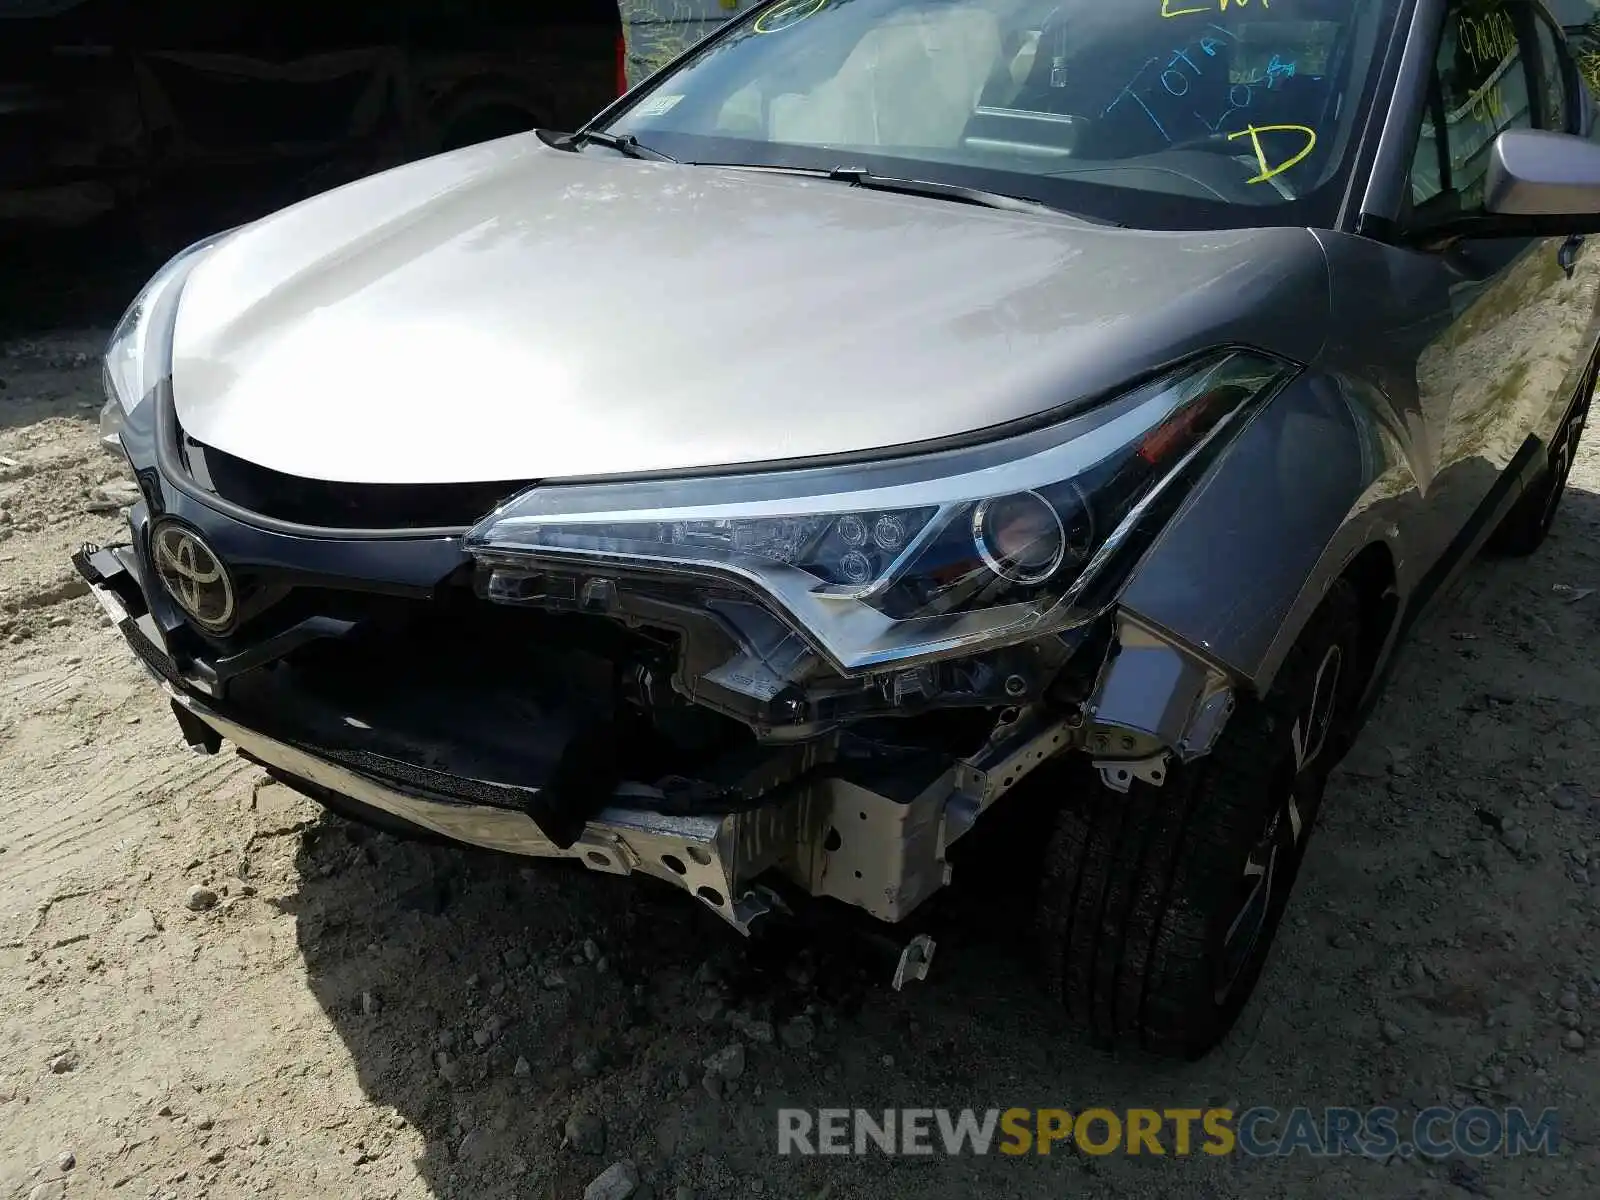 9 Photograph of a damaged car NMTKHMBXXKR069781 TOYOTA C-HR 2019